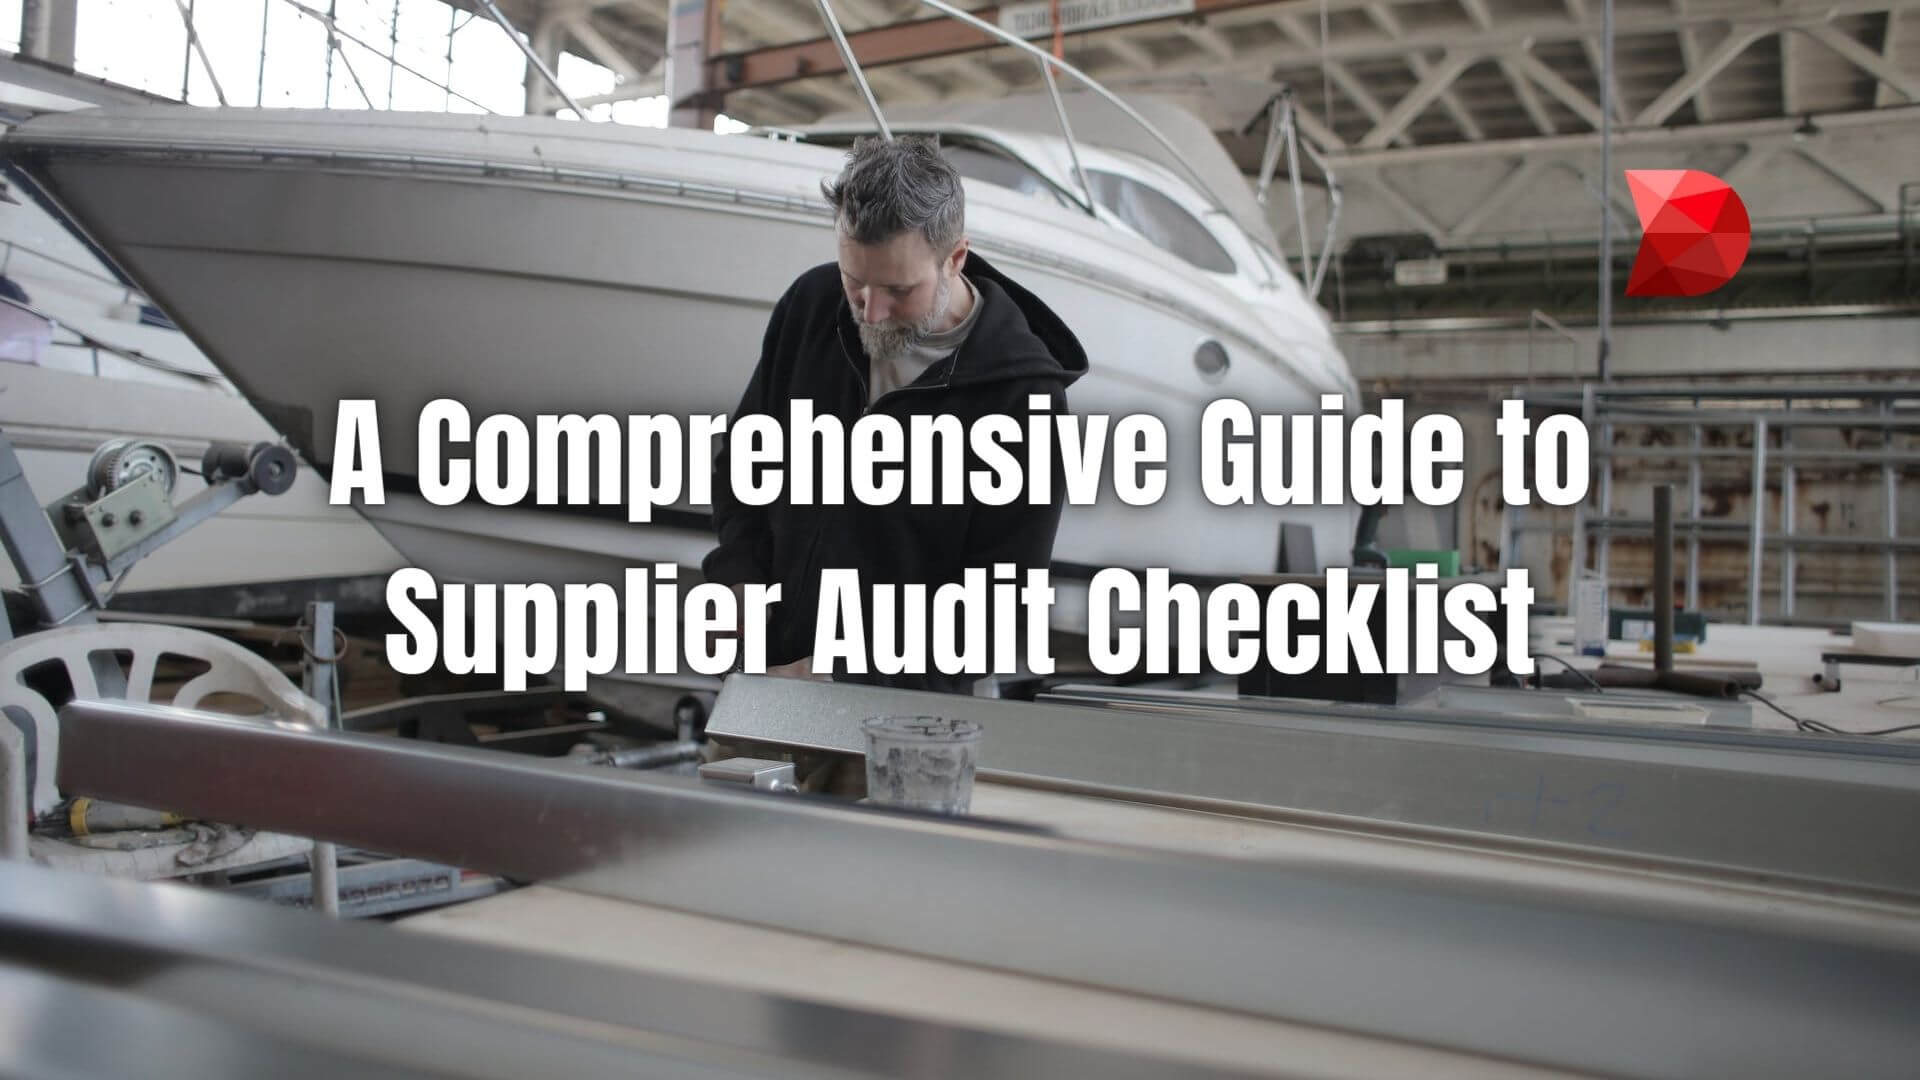 Strategic insights for flawless supplier audits! Explore our guide to supplier audit checklist to optimize your quality management processes.